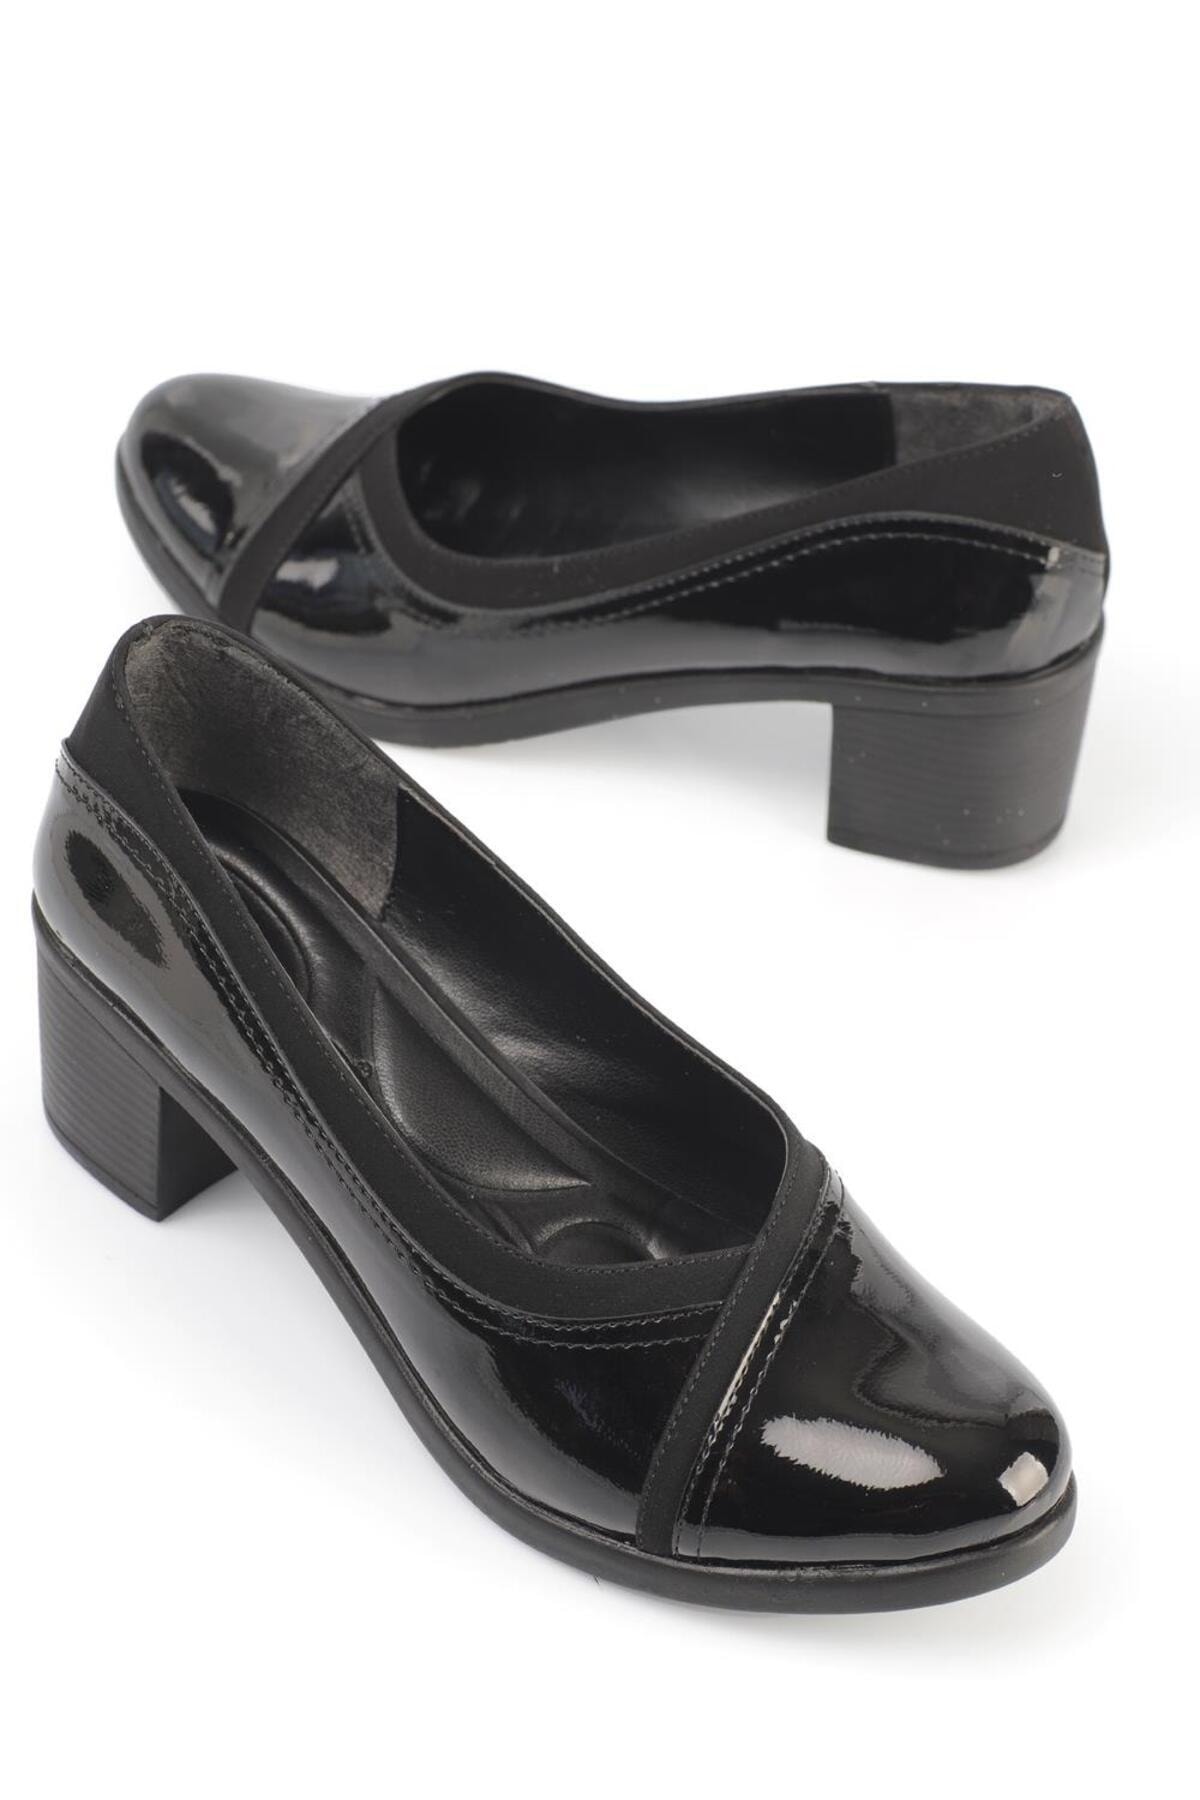 Levně Capone Outfitters Wedge Heel Women's Shoes